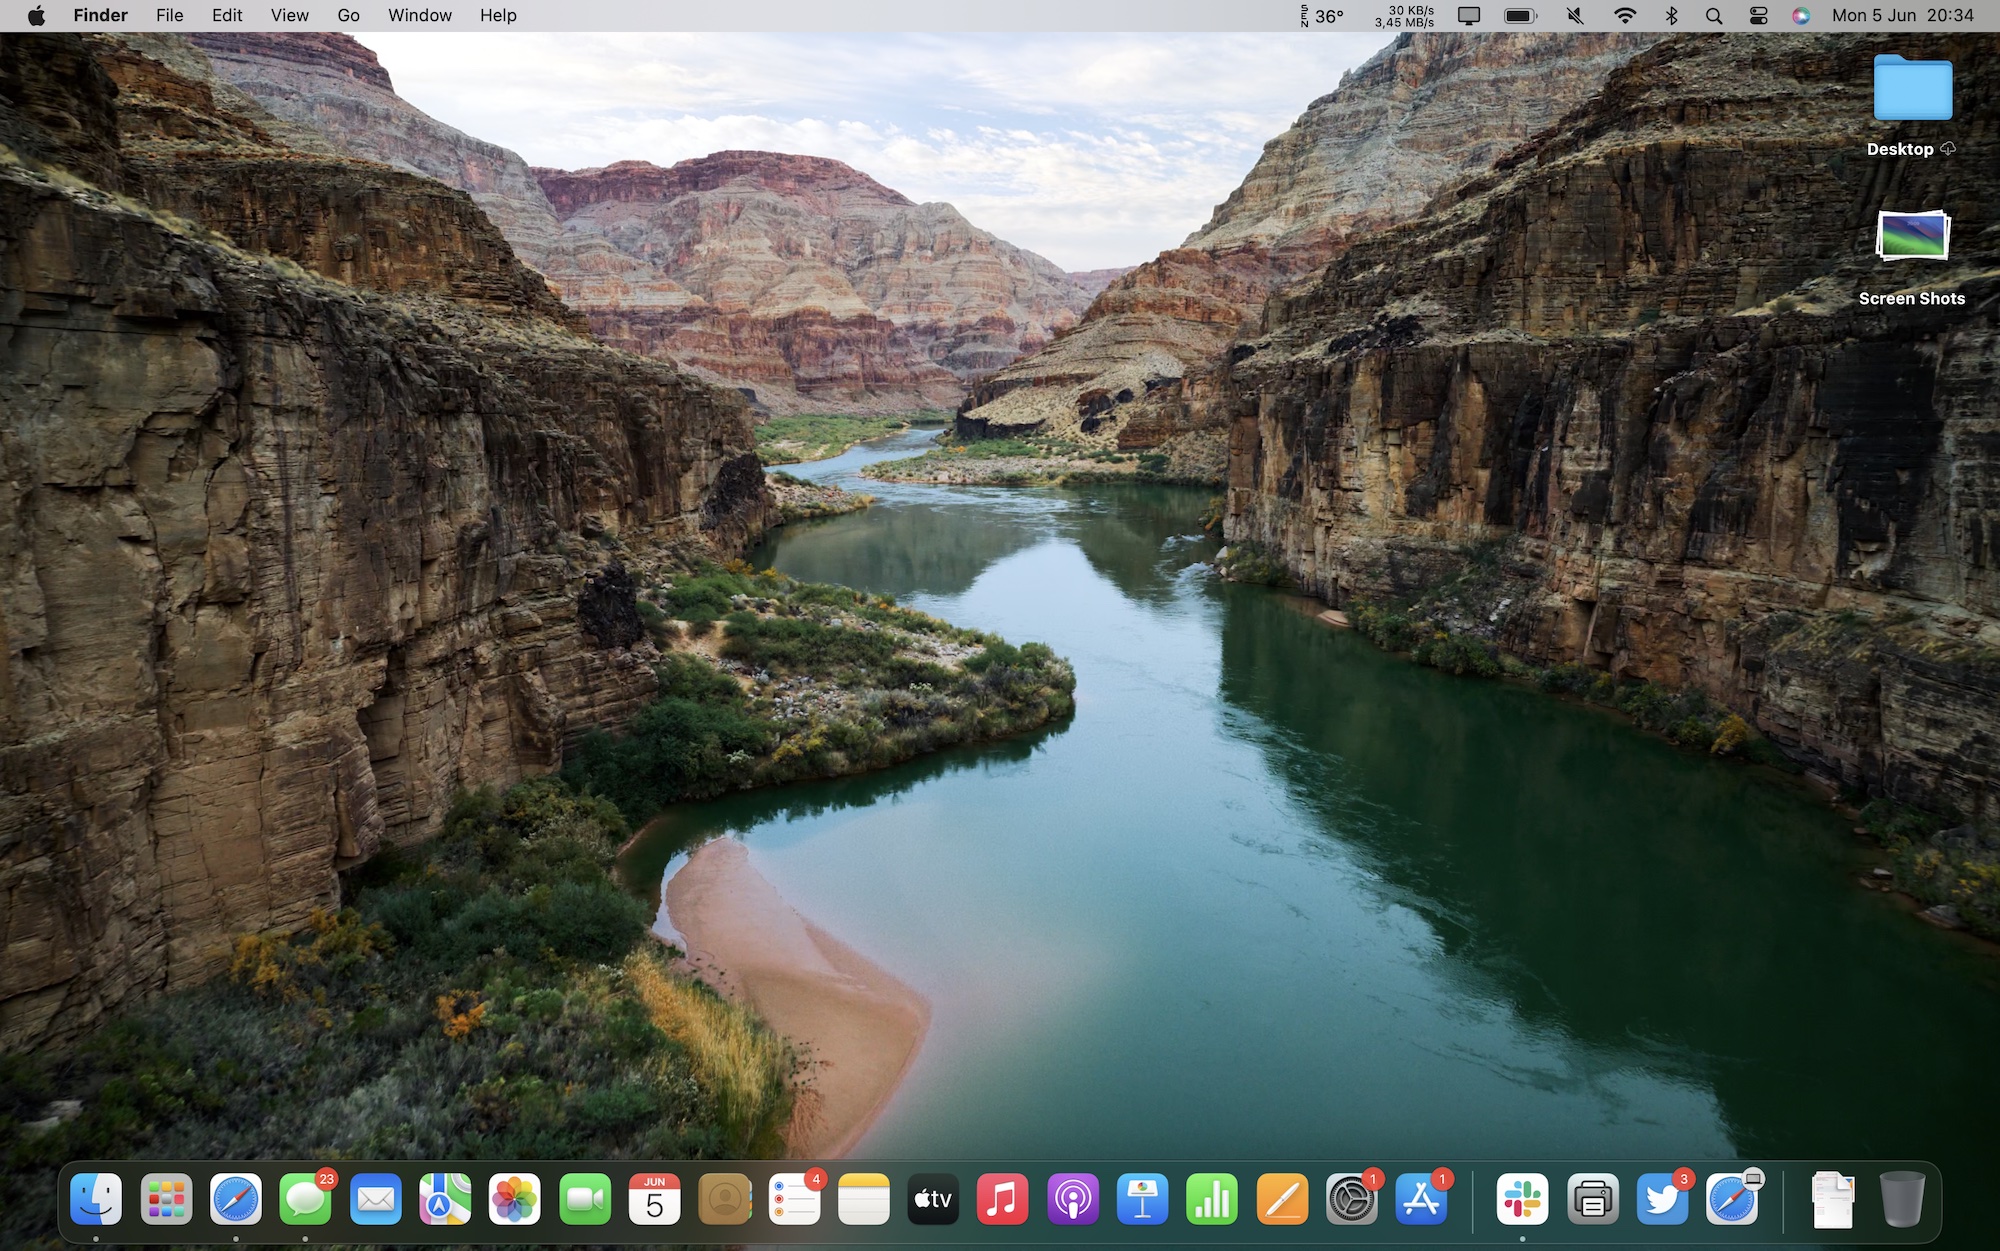 macOS Sonoma brings new Lock Screen with aerial wallpapers